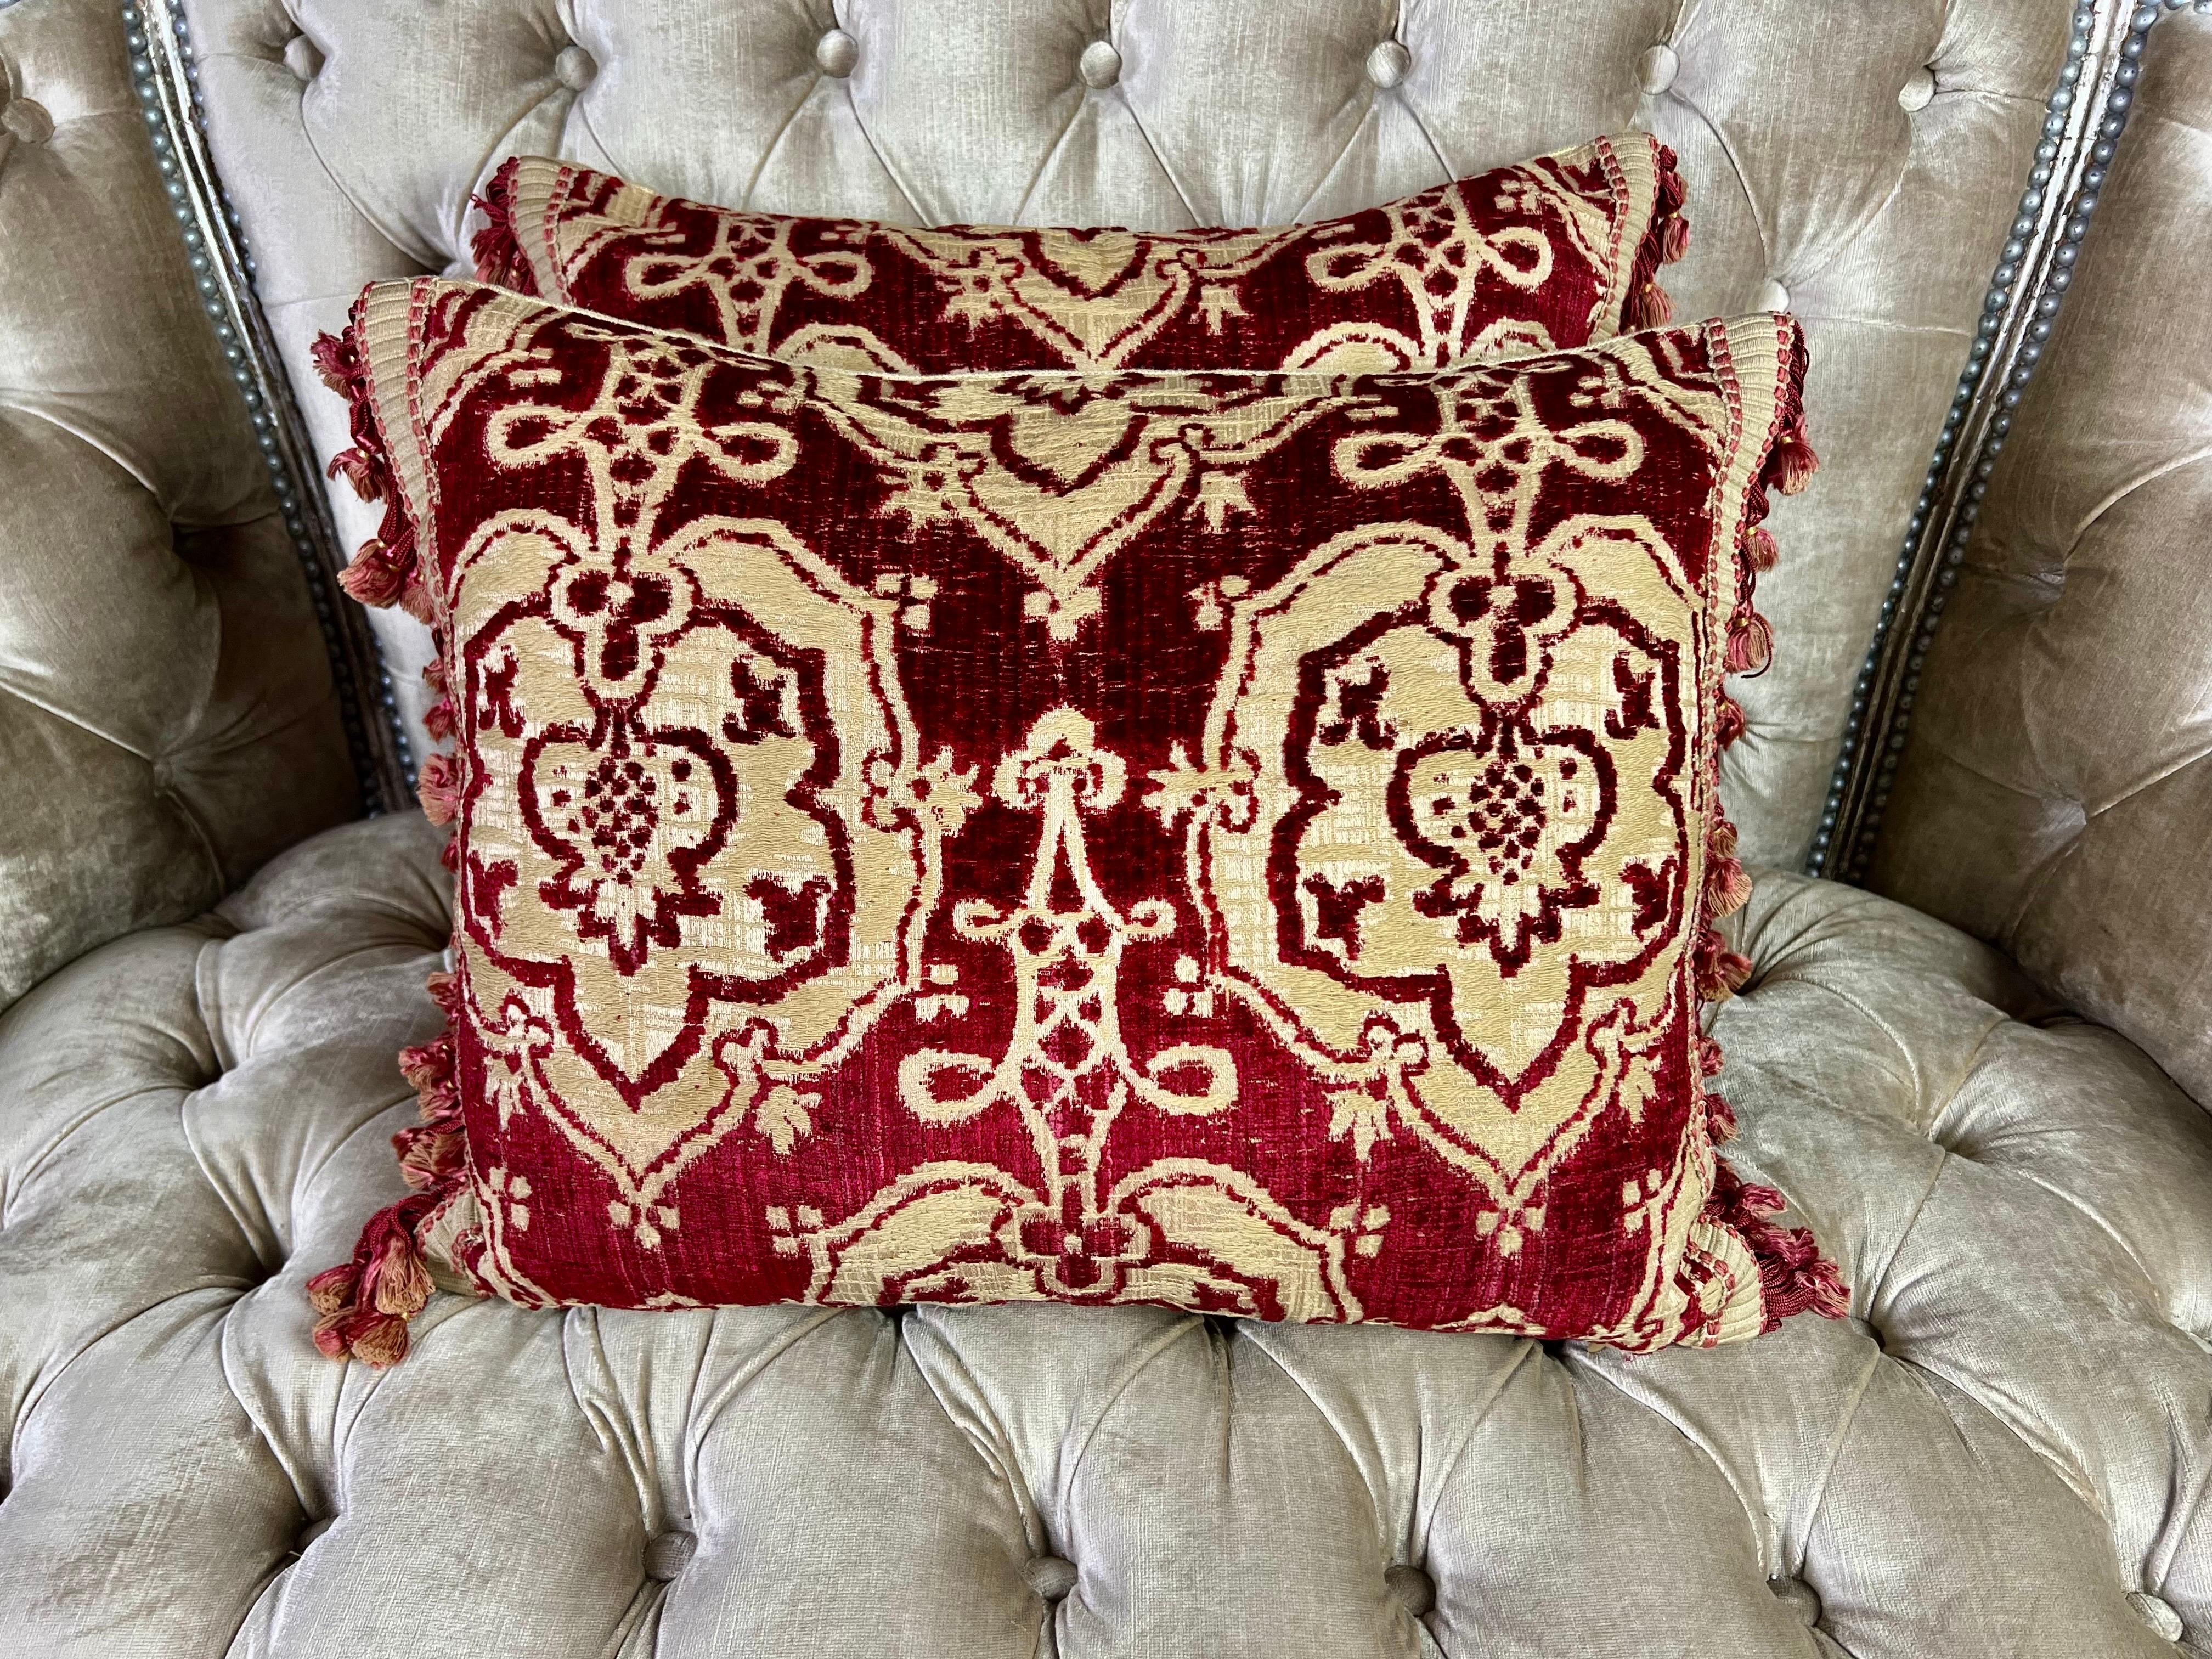 Pair of custom pillows made with rare early 19th century velvet Brocade in a crimson and wheat coloration.  Antique tassel trim at sides of pillows.  Linen backs and down filled inserts add to the luxurious pillows.